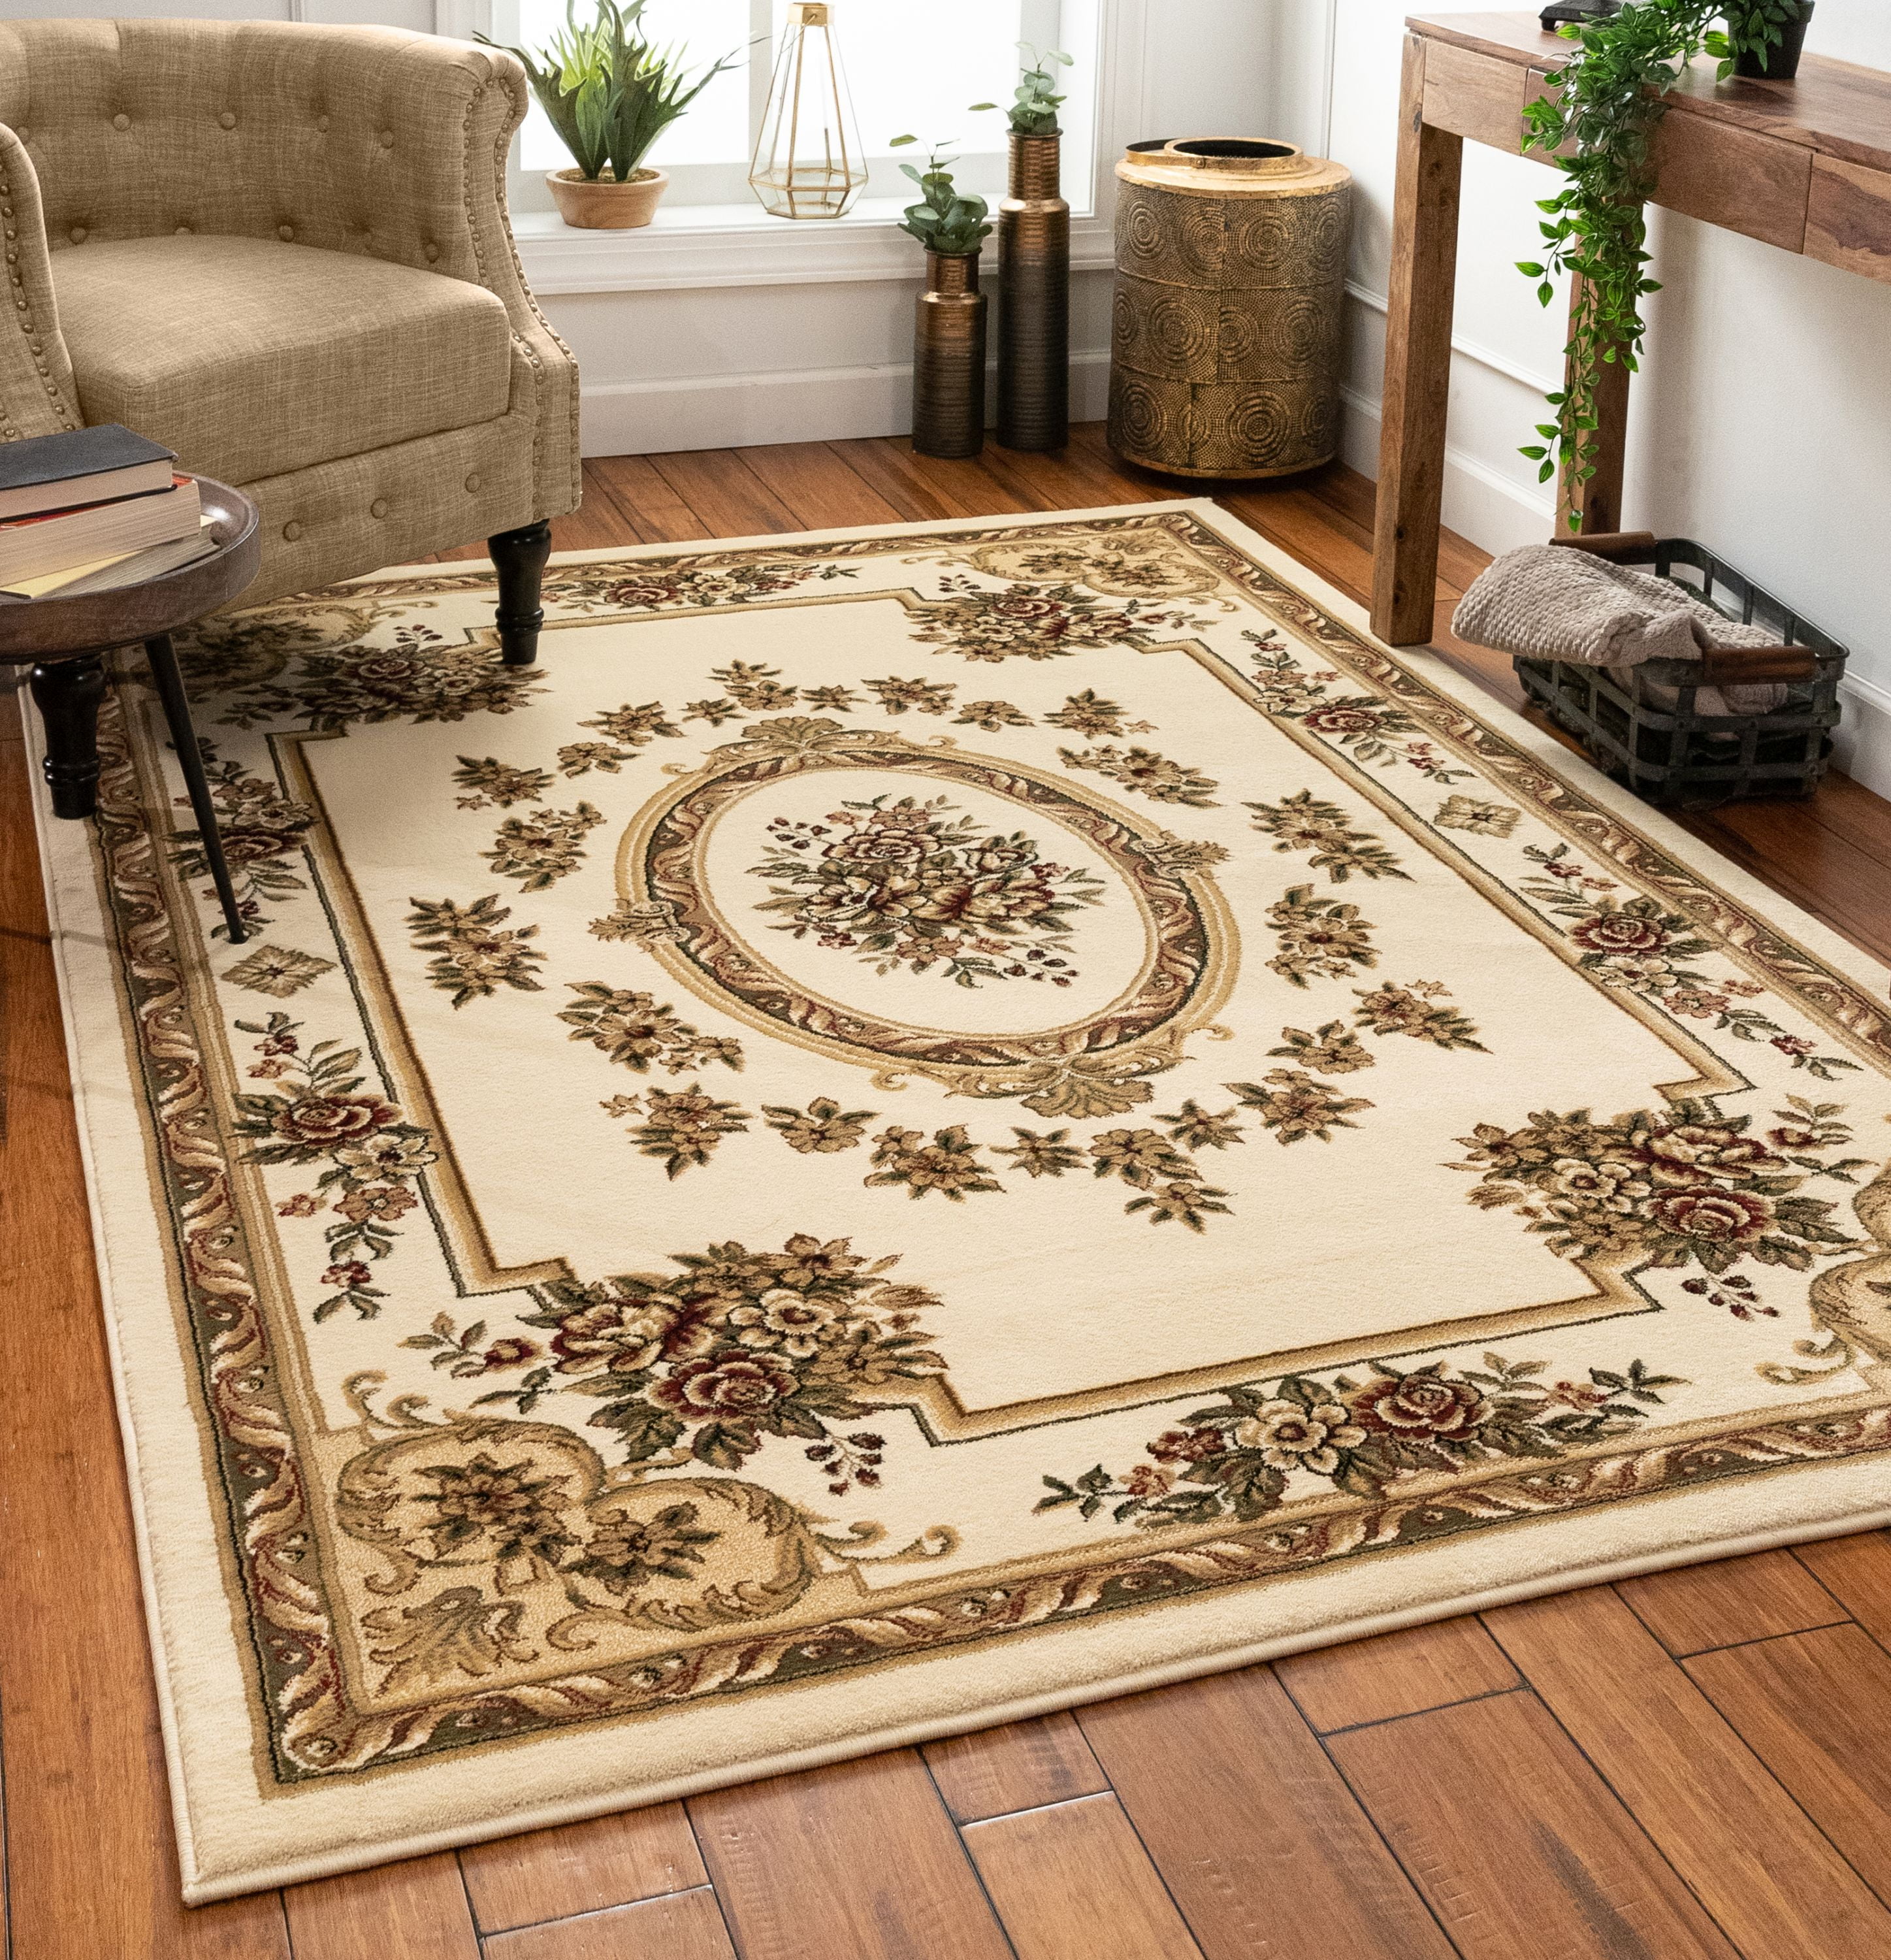 Pastoral Medallion Ivory French European Formal Traditional 5x7 53 X 73 Area Rug Easy To Clean Stain Fade Resistant Shed Free Contemporary Floral Thick Soft Plush Living Dining Room Rug